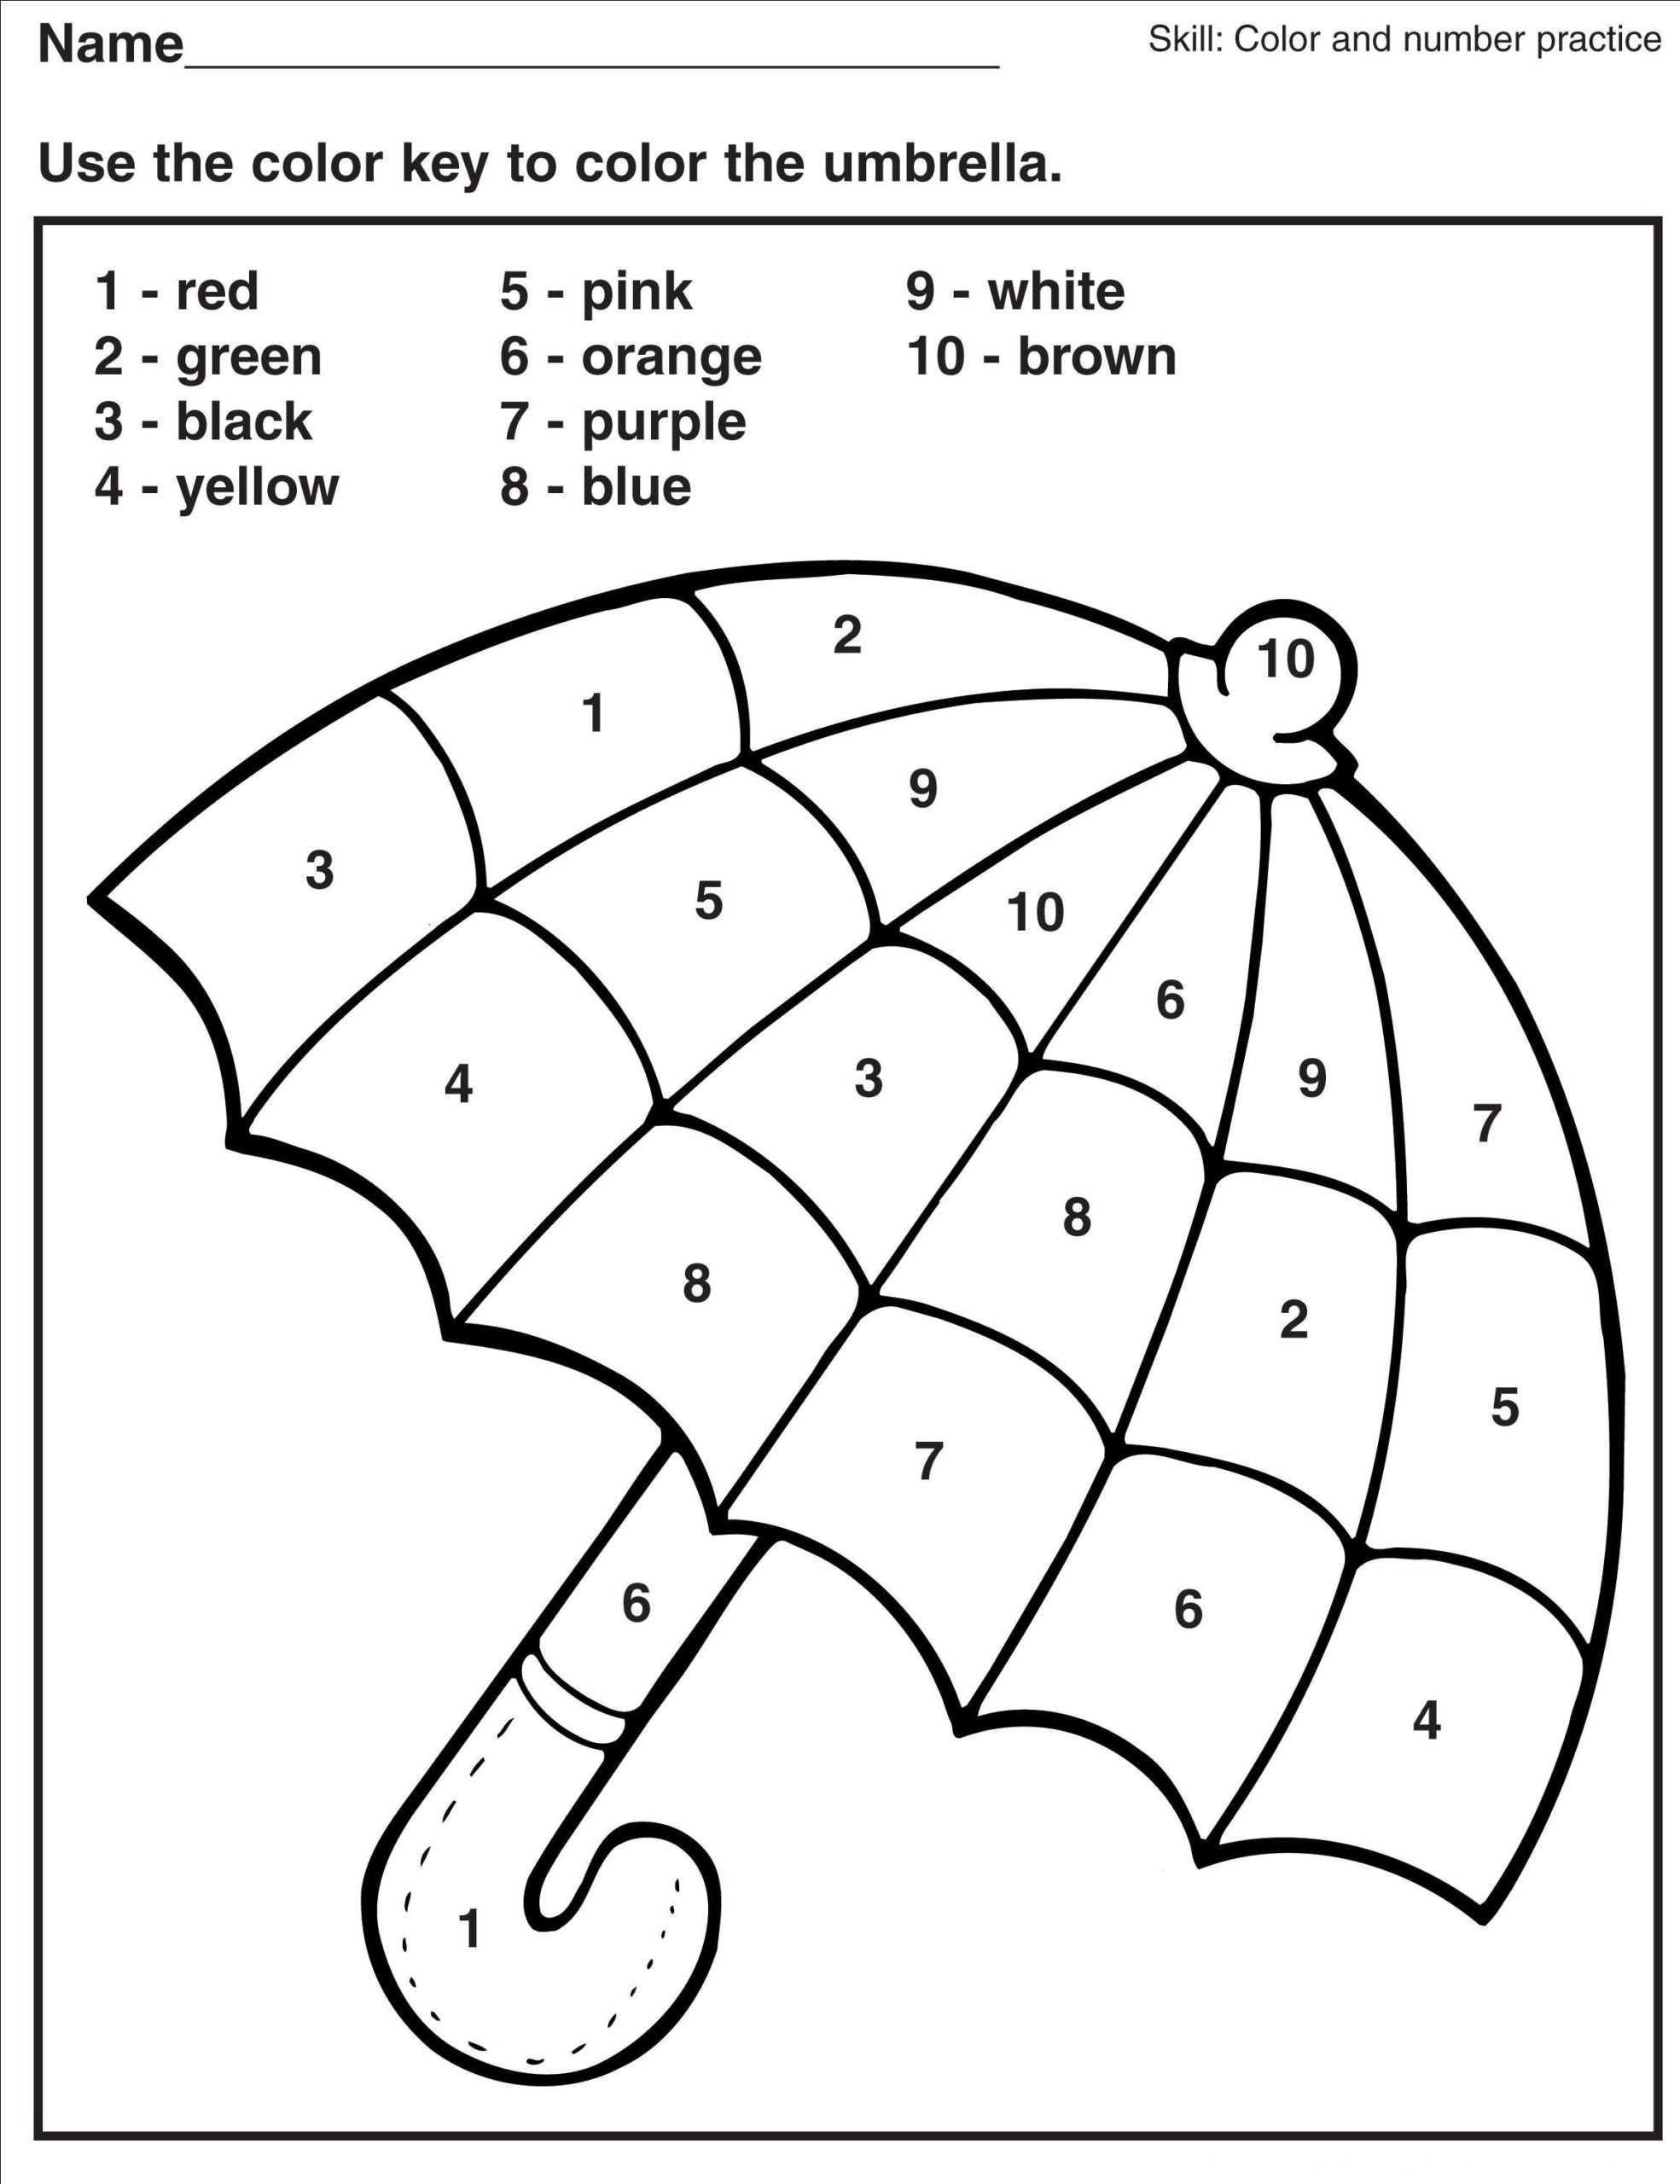 Coloring Pages : Free Printable Colornumber Coloring Inside Blank Turkey Template